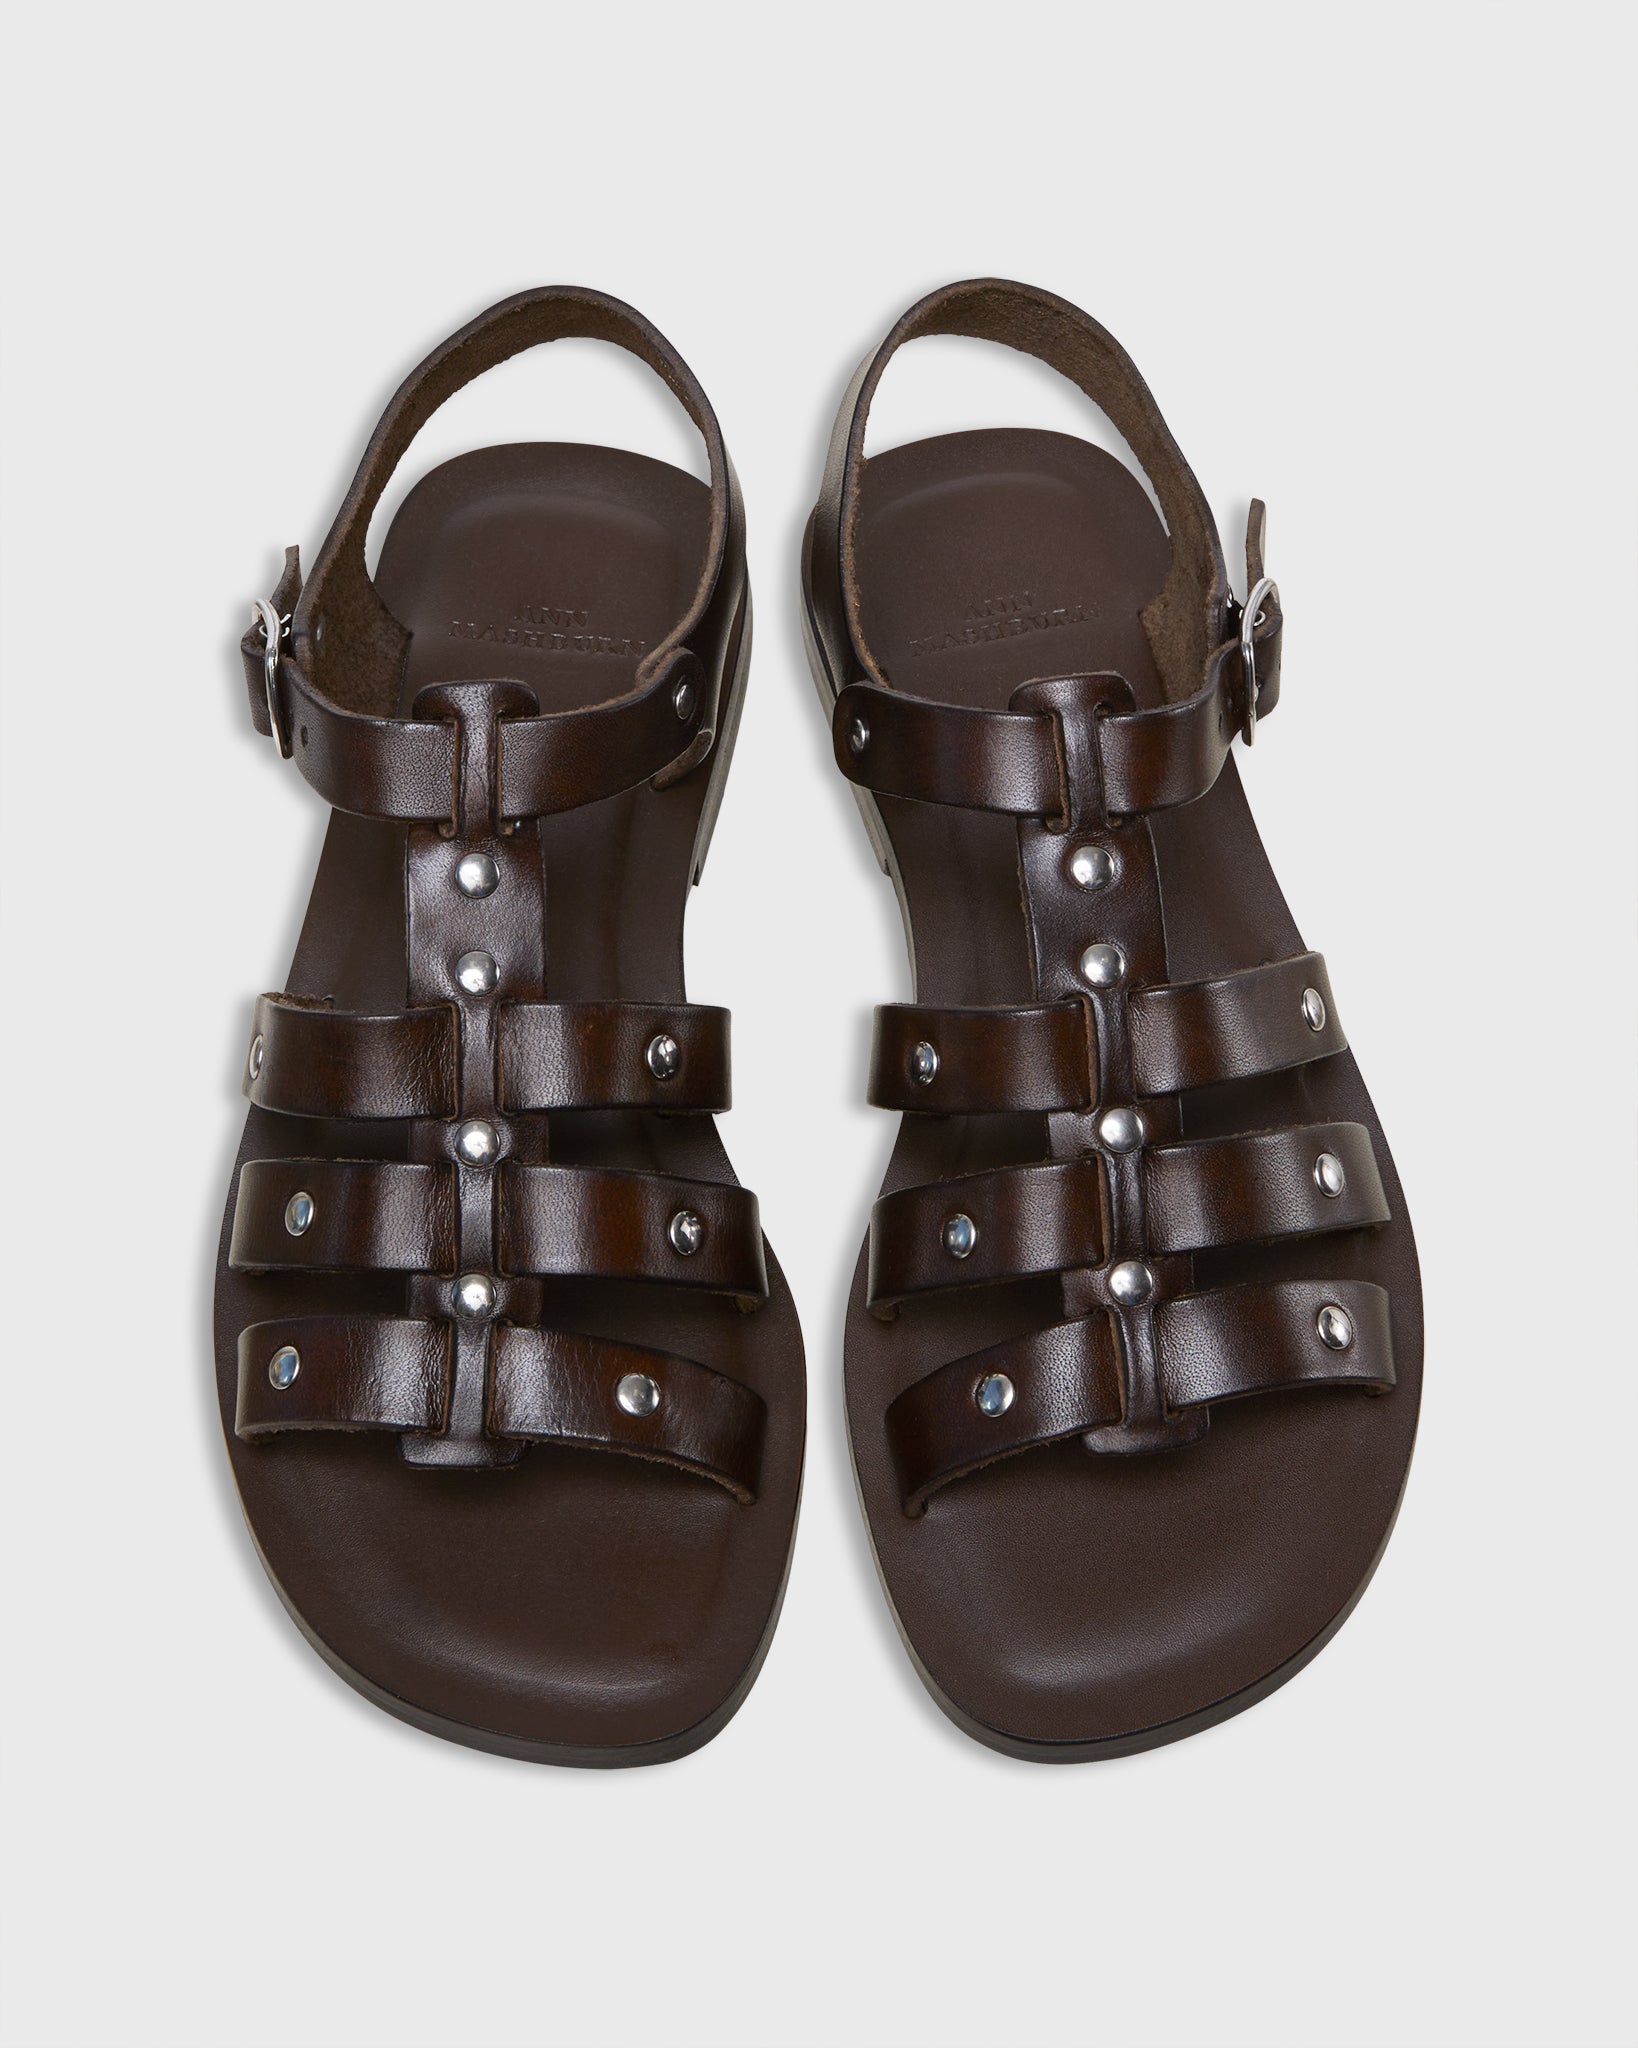 Studded Sandal in Chocolate Leather